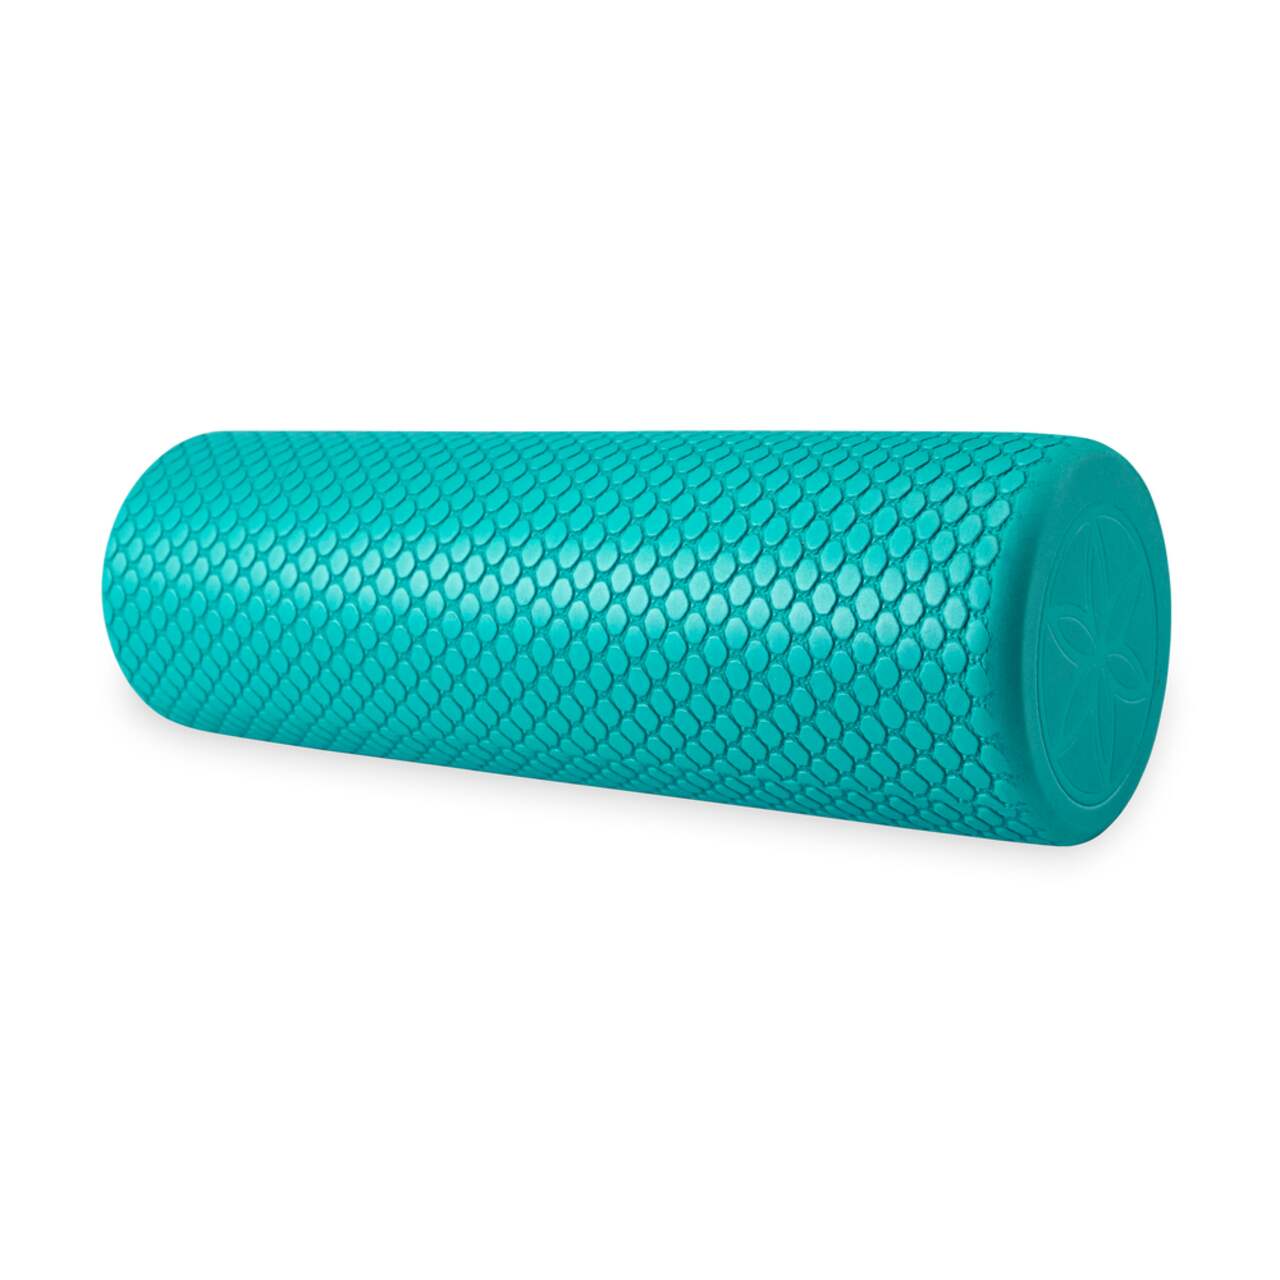 GAIAM Restore Hot & Cold Therapy Kit - Exercise band, Buy online